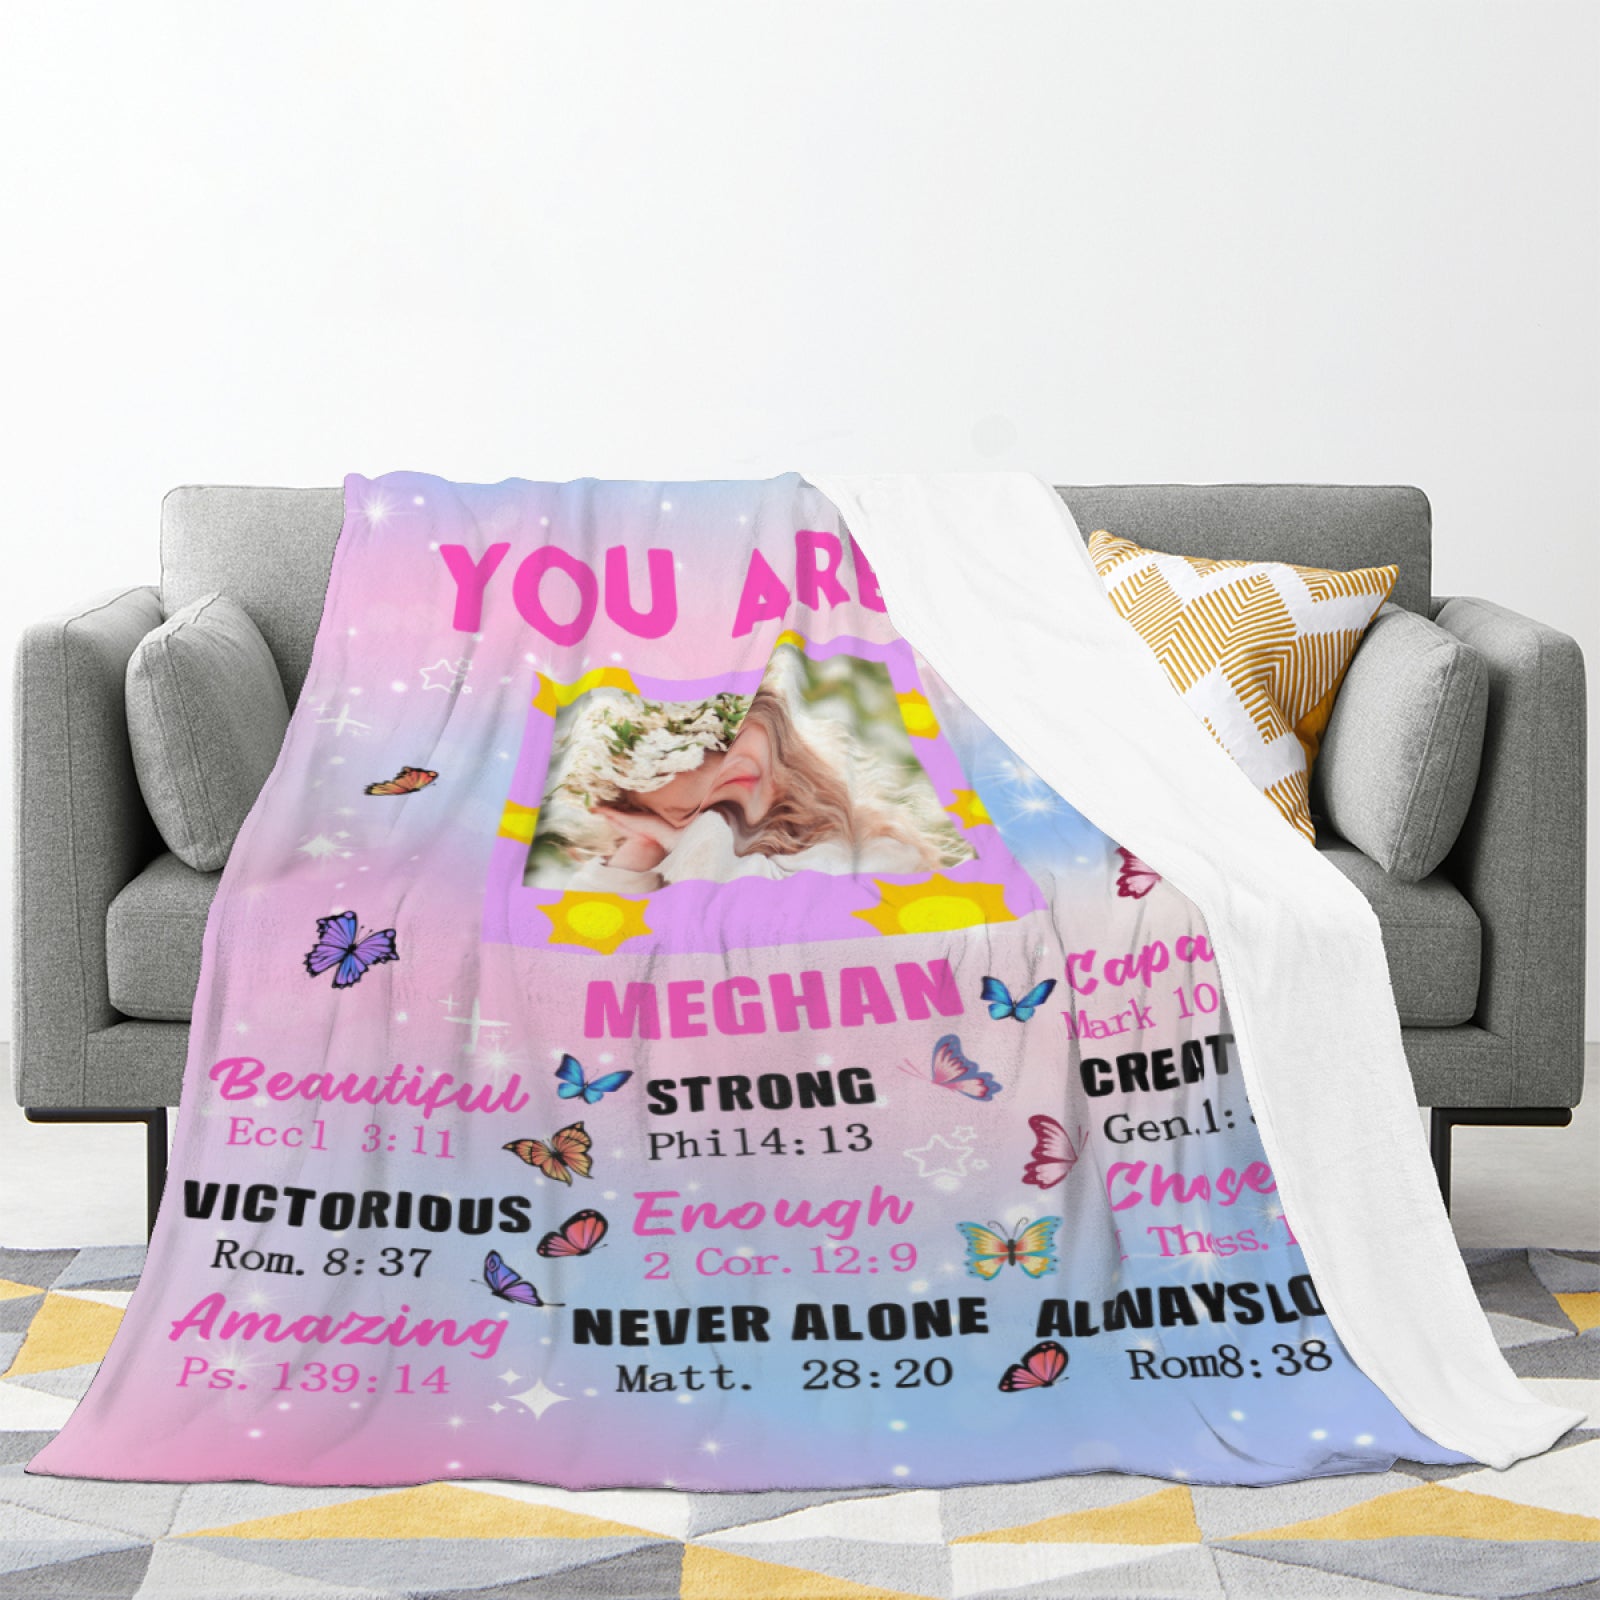 Personalized Blanket with Name and Photo for Kids, Customized Toddler Blanket Personalized Blankets Gifts for Daycare Preschool Kindergarten